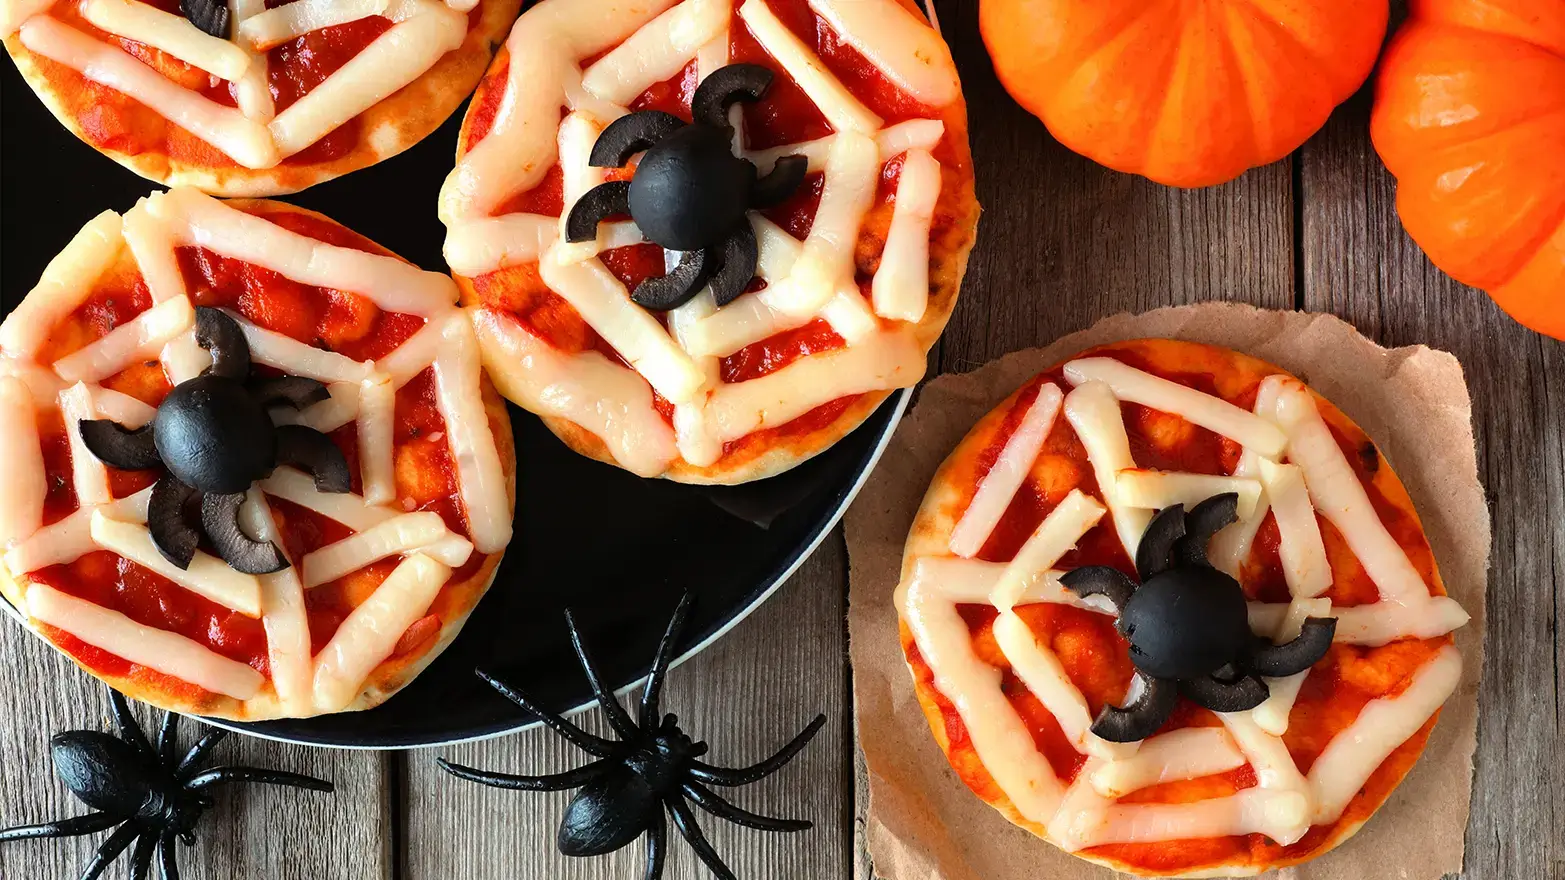 Mini pizzas with cheese spider webs and olive spiders
